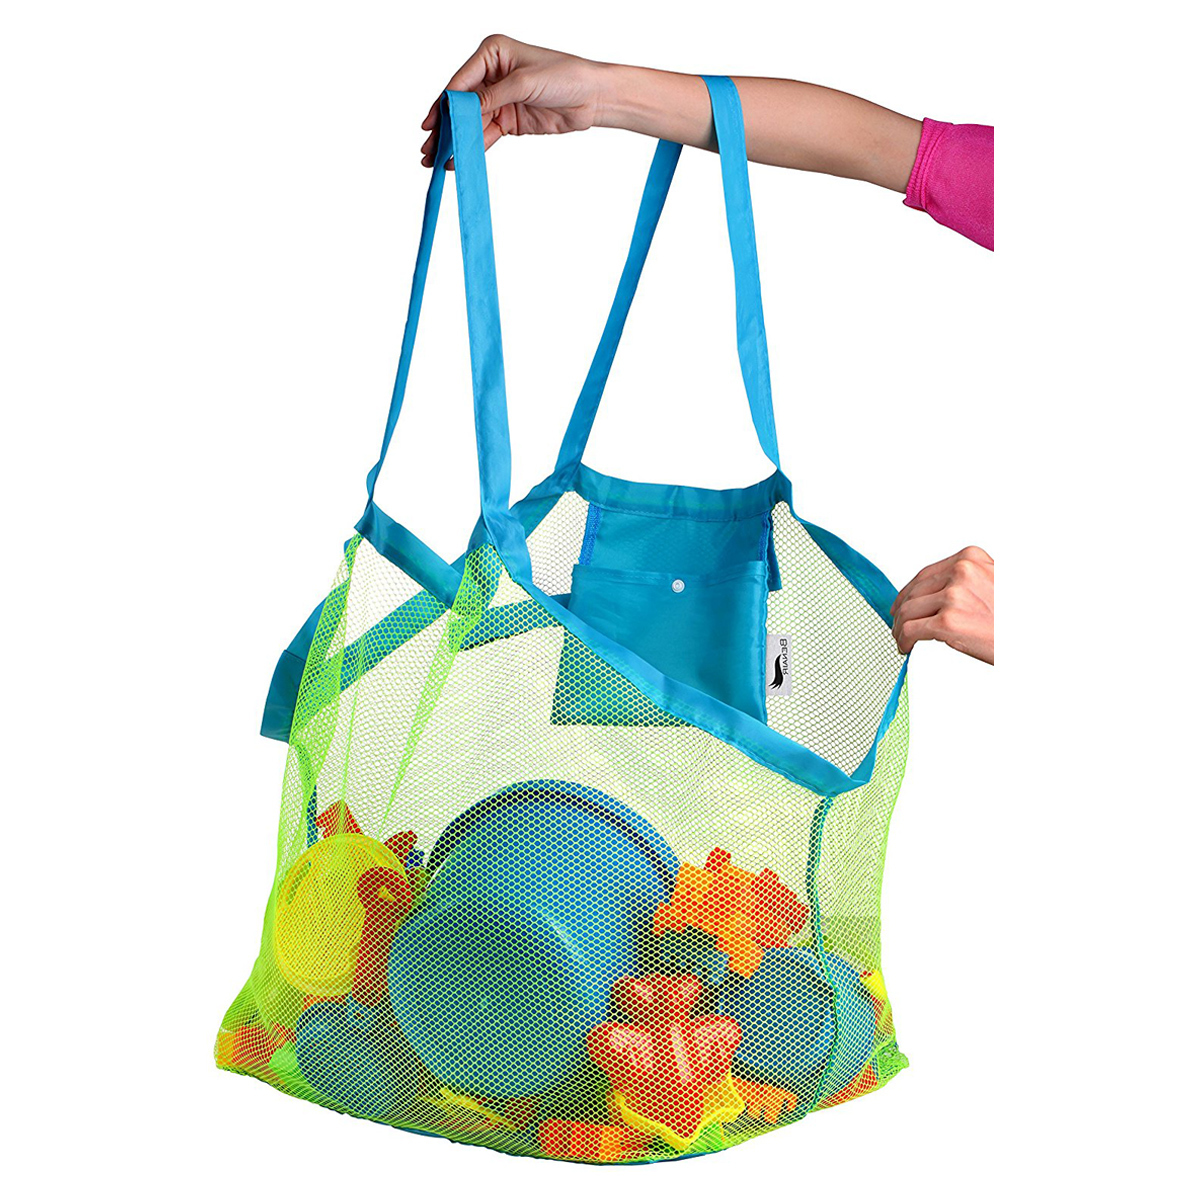 Extra Large Mesh Sandproof and Waterproof Storage Beach Bag Tote - Perfect for Kids Toys, Towels ...